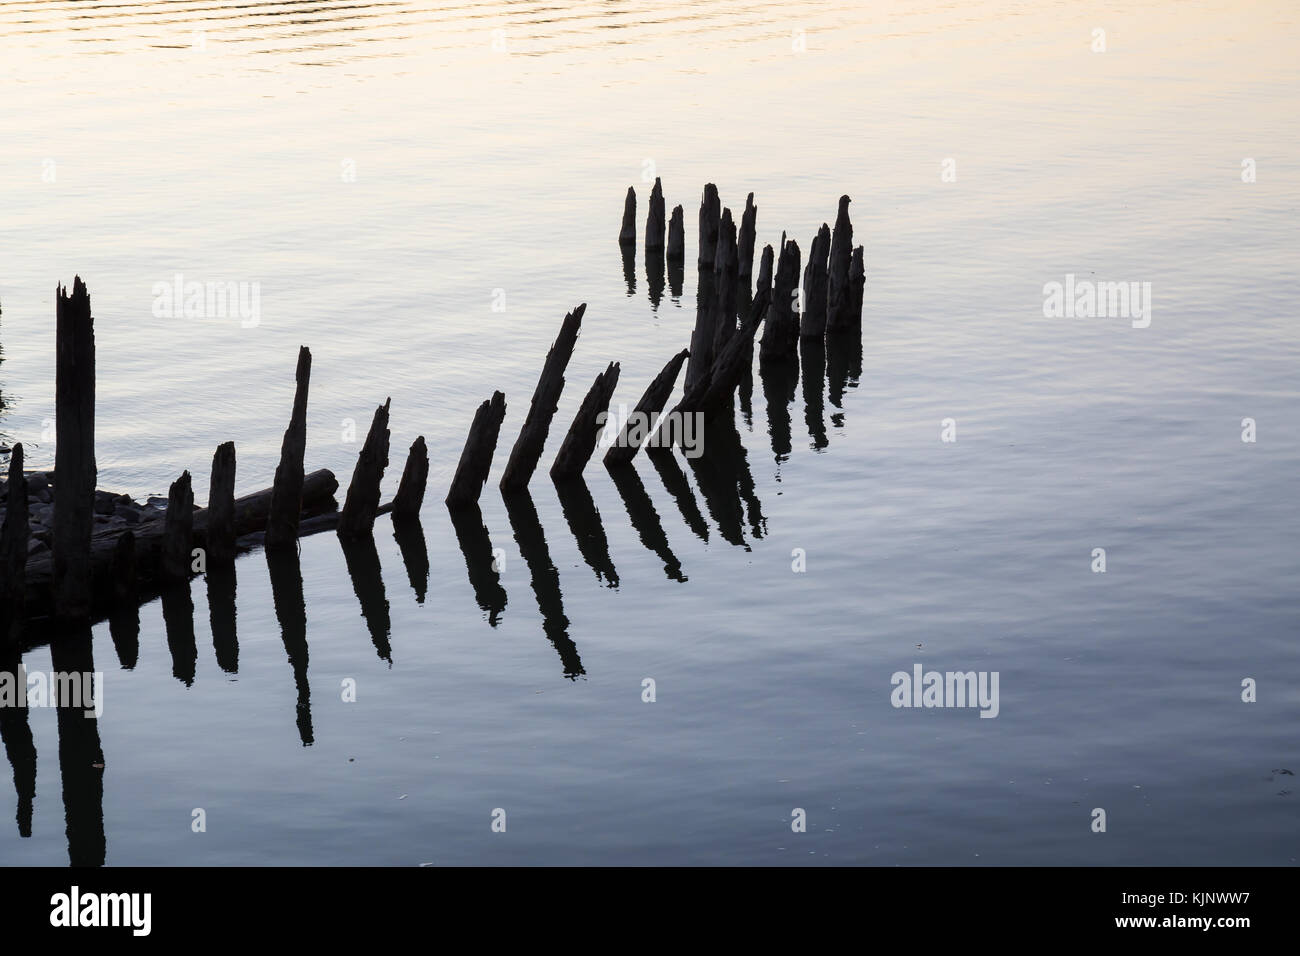 Abstract picture of wooden poles sticking out from Fraser River at Kanaka Creek Regional Park, Maple Ridge, Greater Vancouver, British Columbia, Canad Stock Photo